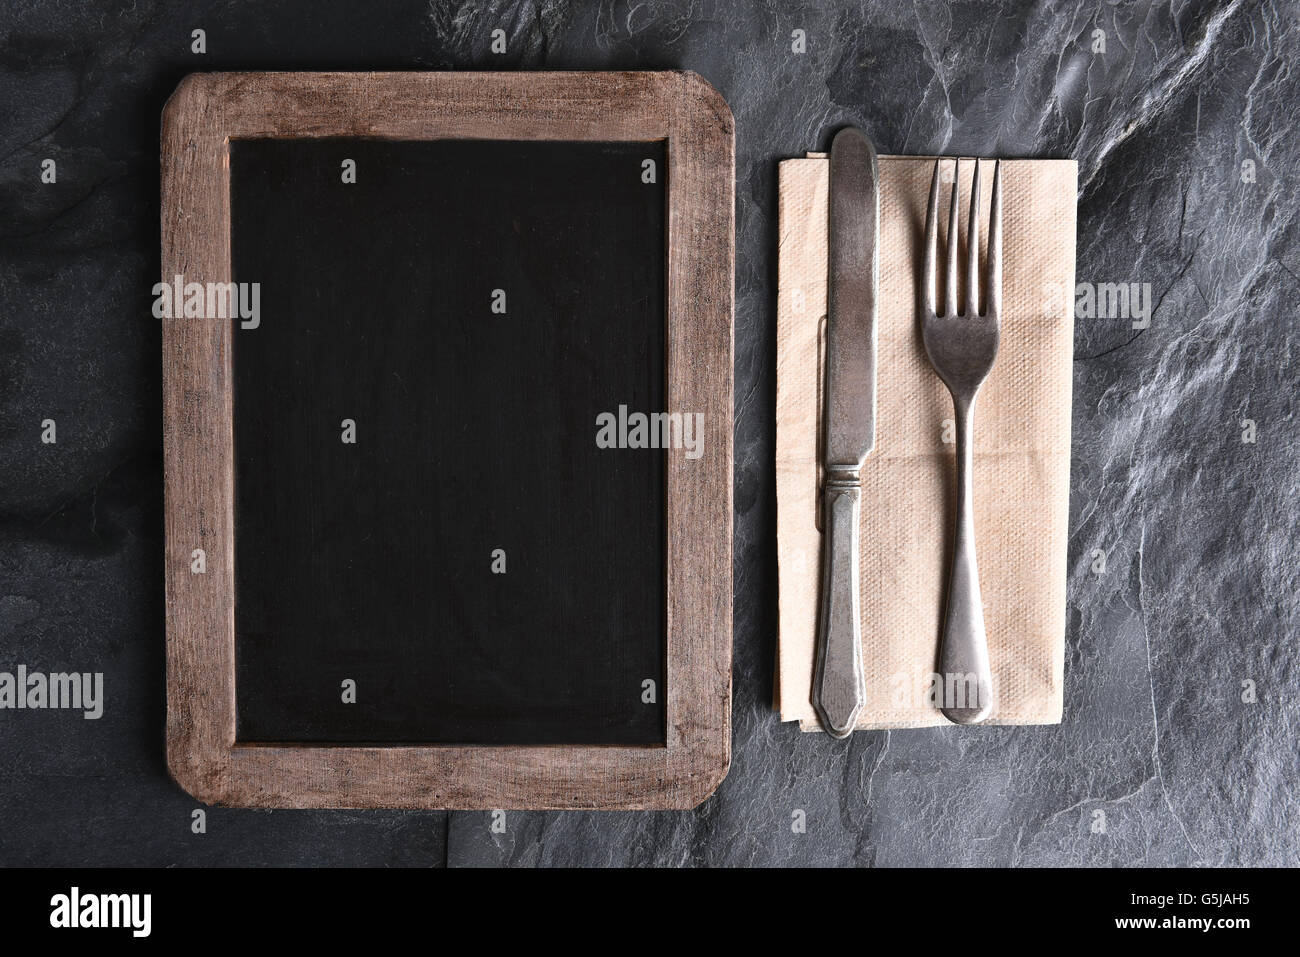 High angle view of a blank chalkboard menu next to silverware on a napkin. Strong side light on a slate table. Stock Photo